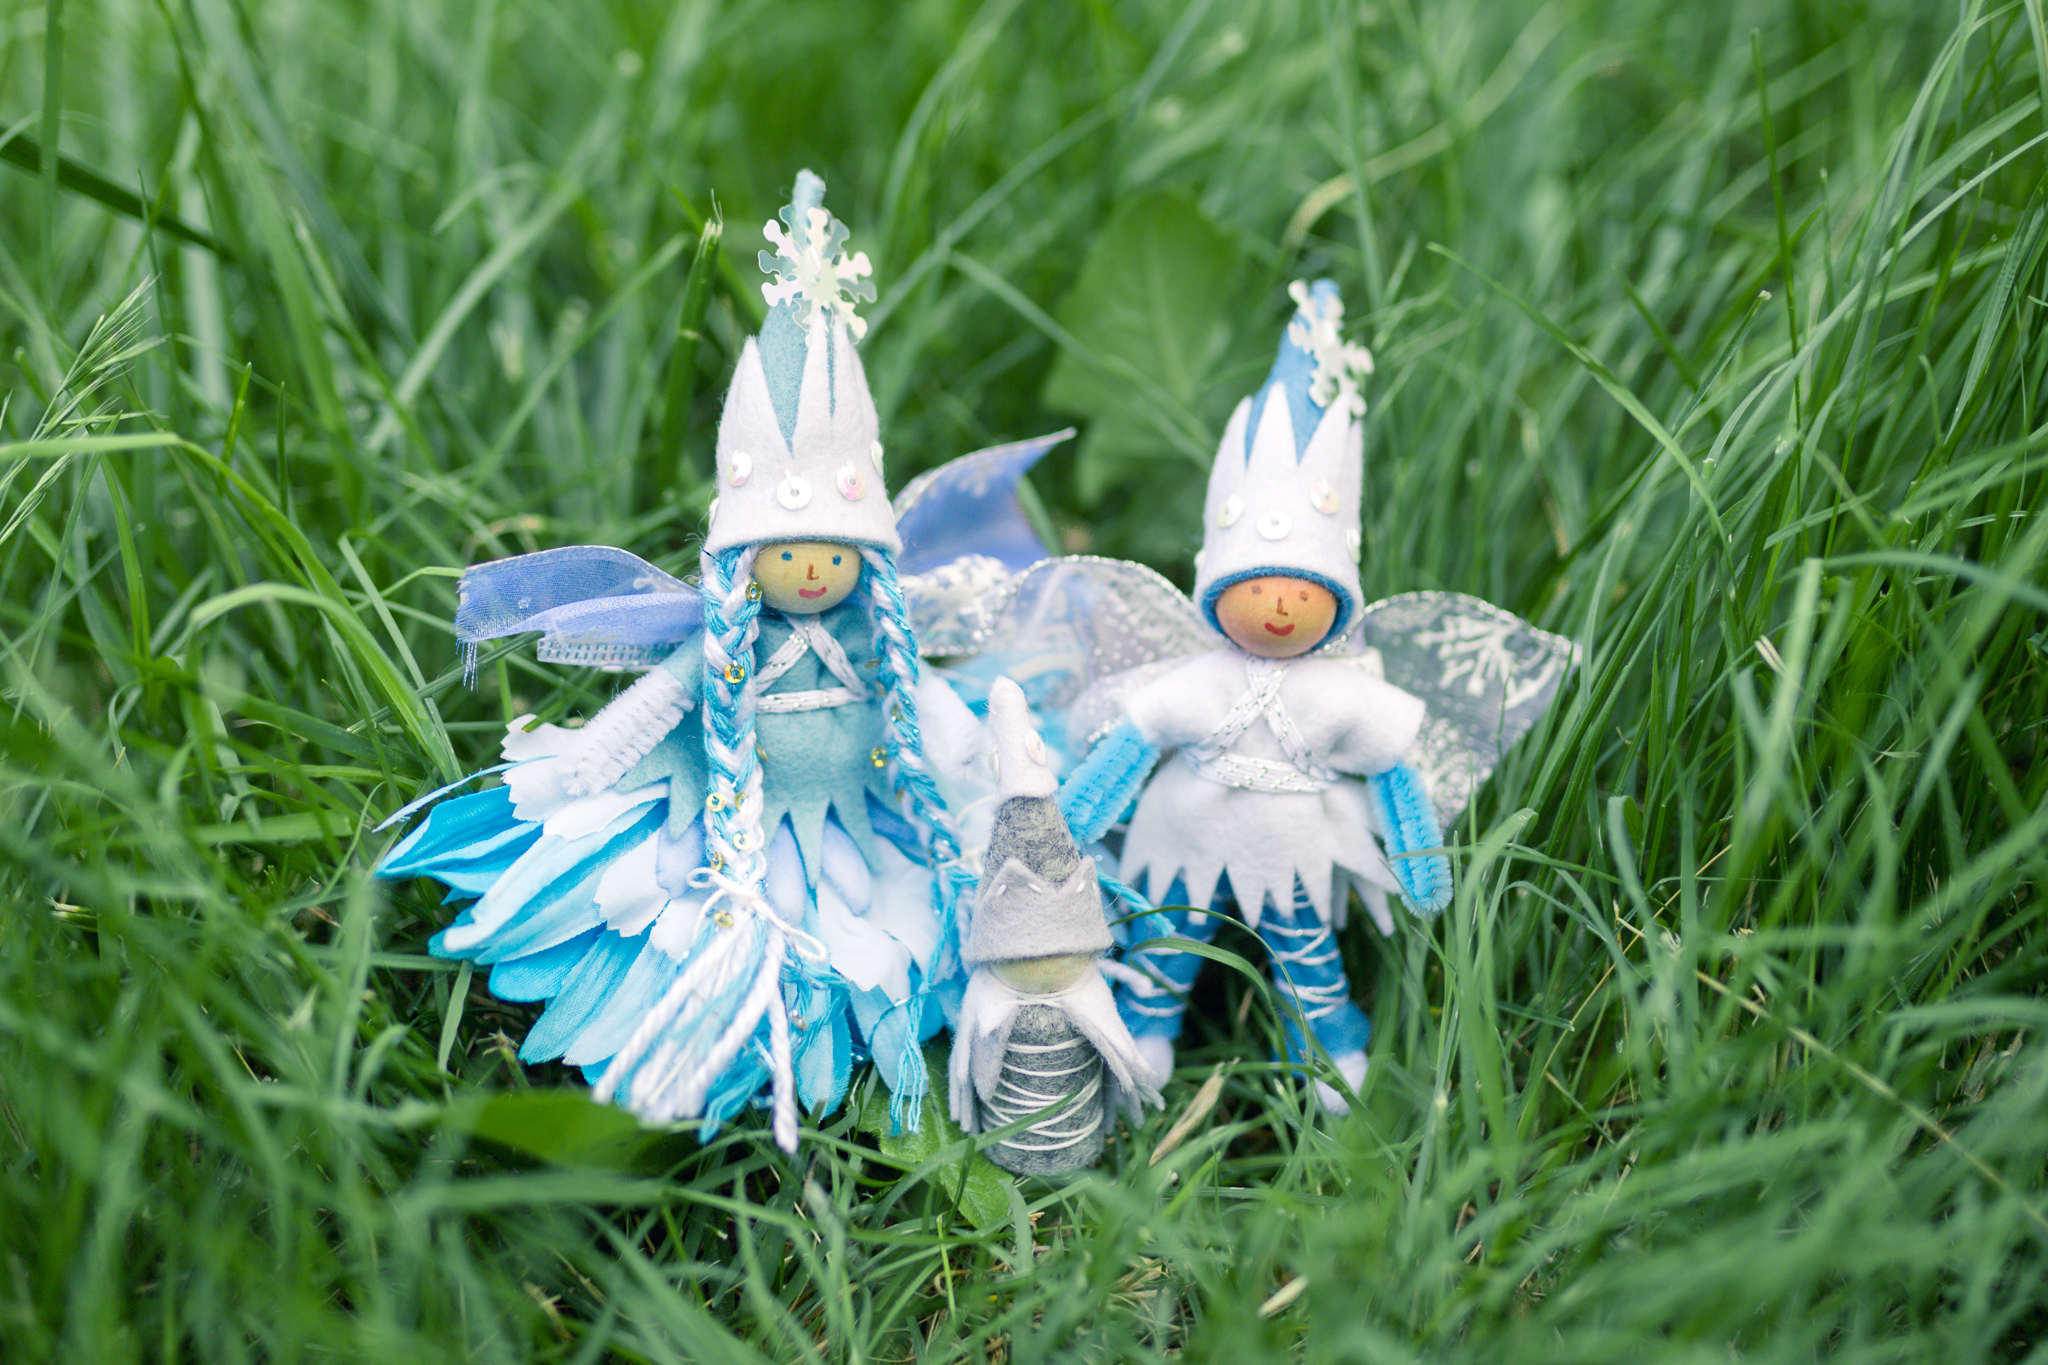 Magical Forest Fairy Crafts through the Seasons by Lenka Vodicka-Paredes and Asia Currie